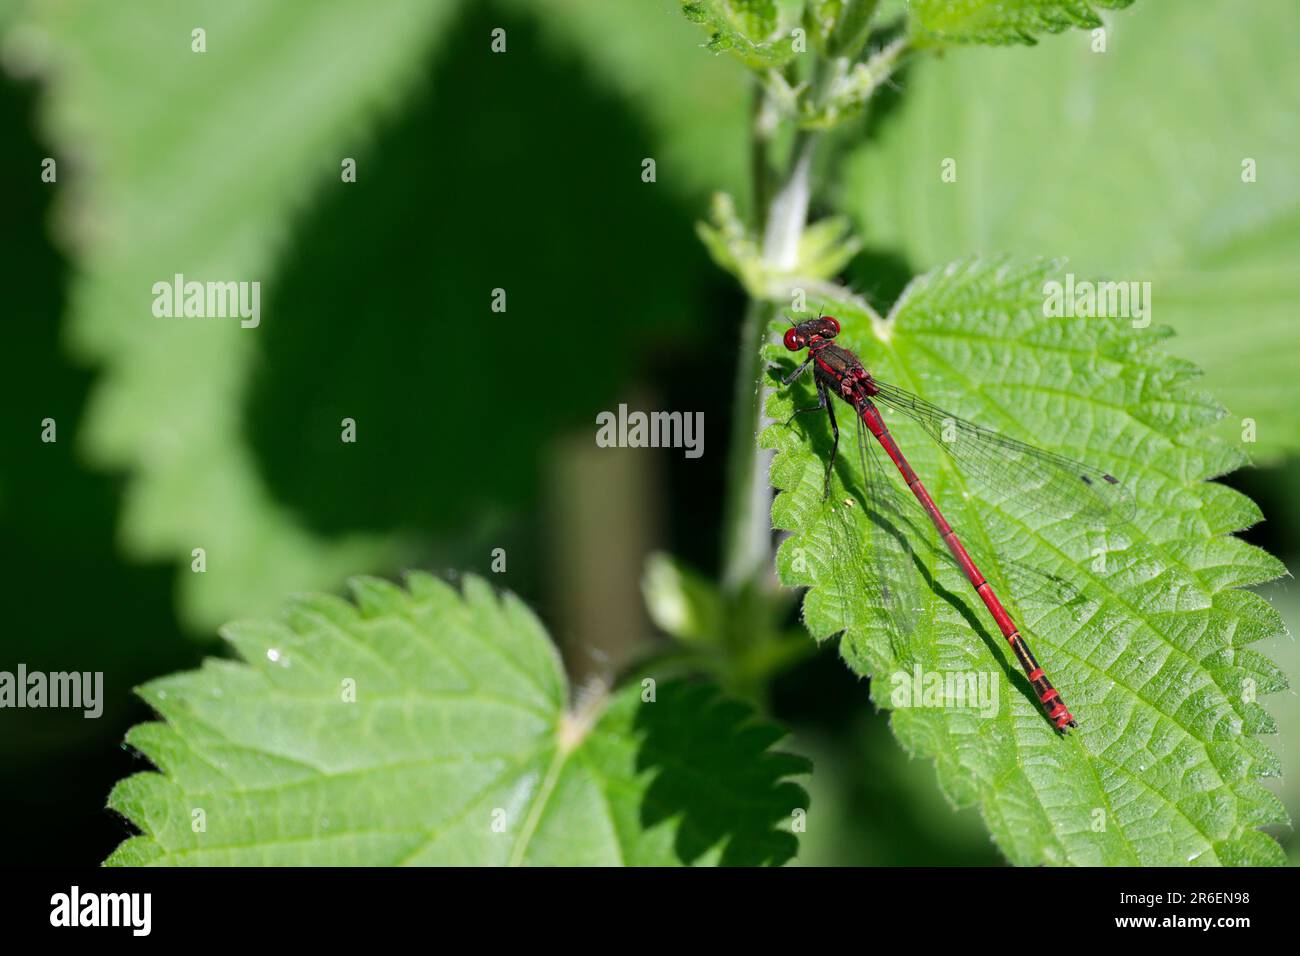 Large red damselfly Pyrrhosoma nymphula, long bright red abdomen marked with black has wide apart compound eyes black legs and dark dot on wings Stock Photo